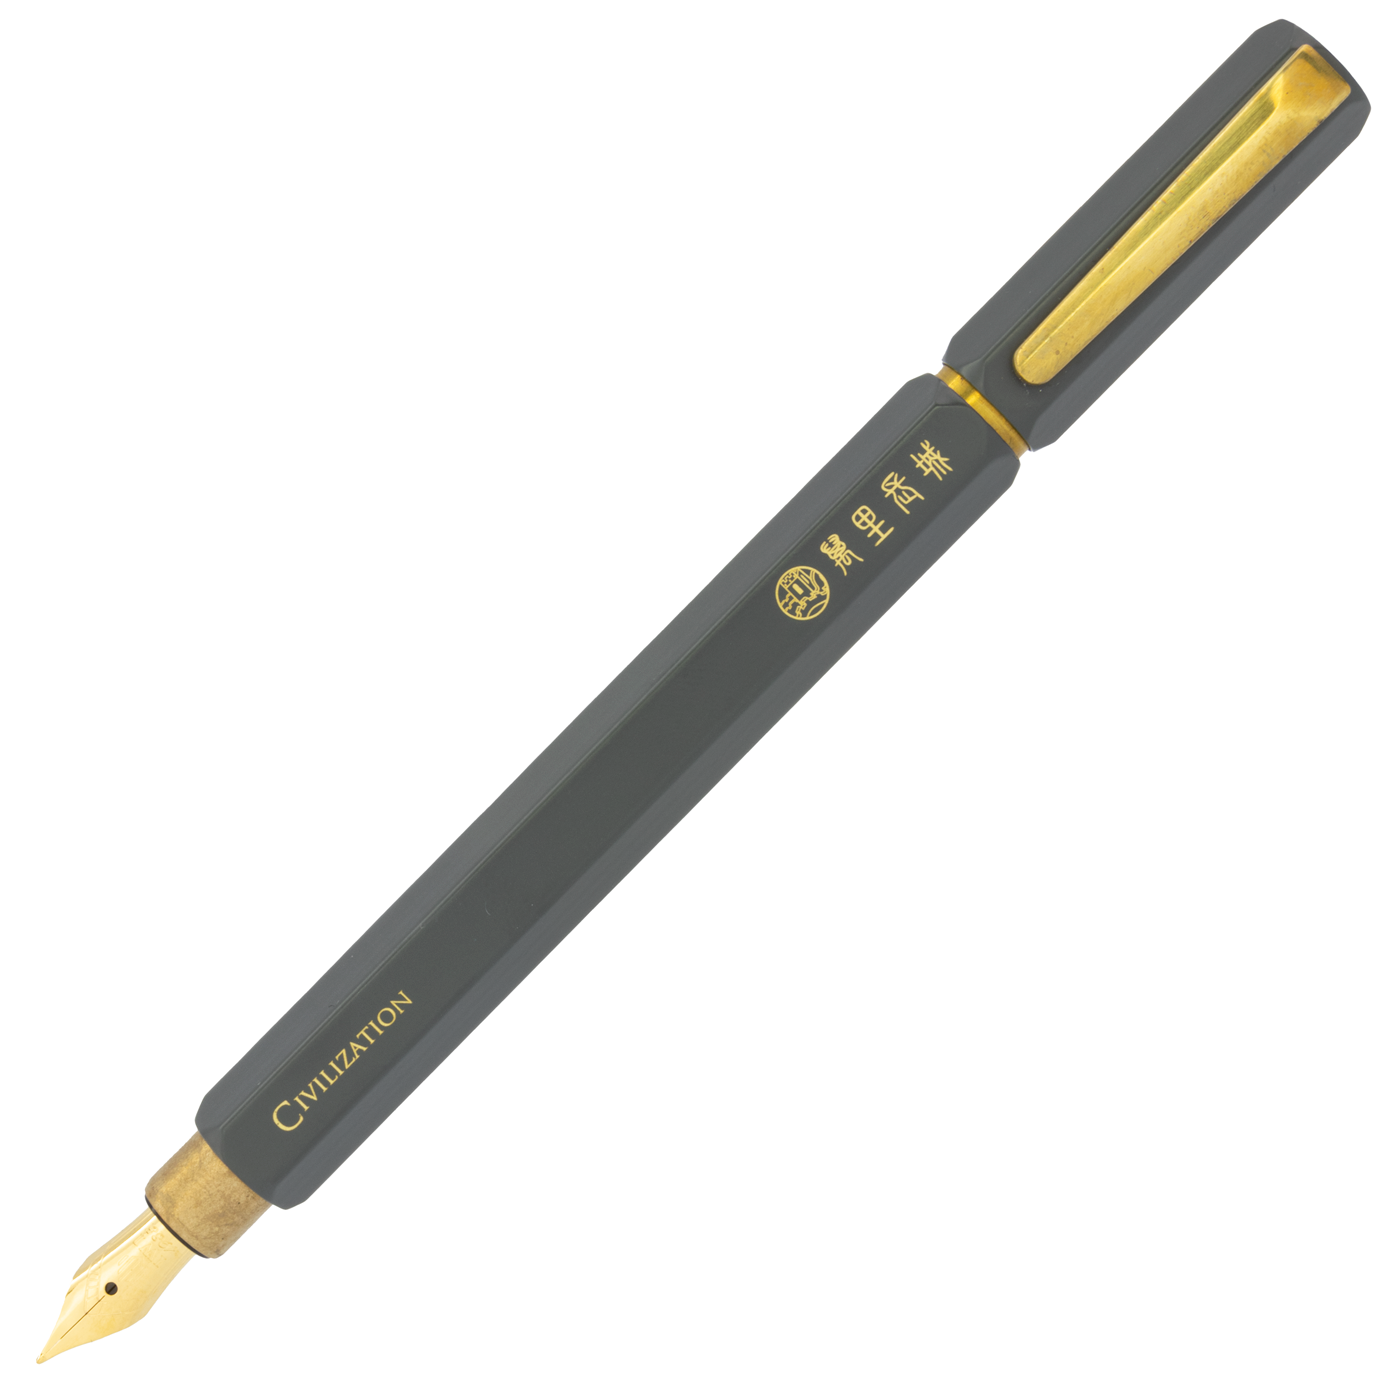 History of Writing Implements - Development of Writing Tools